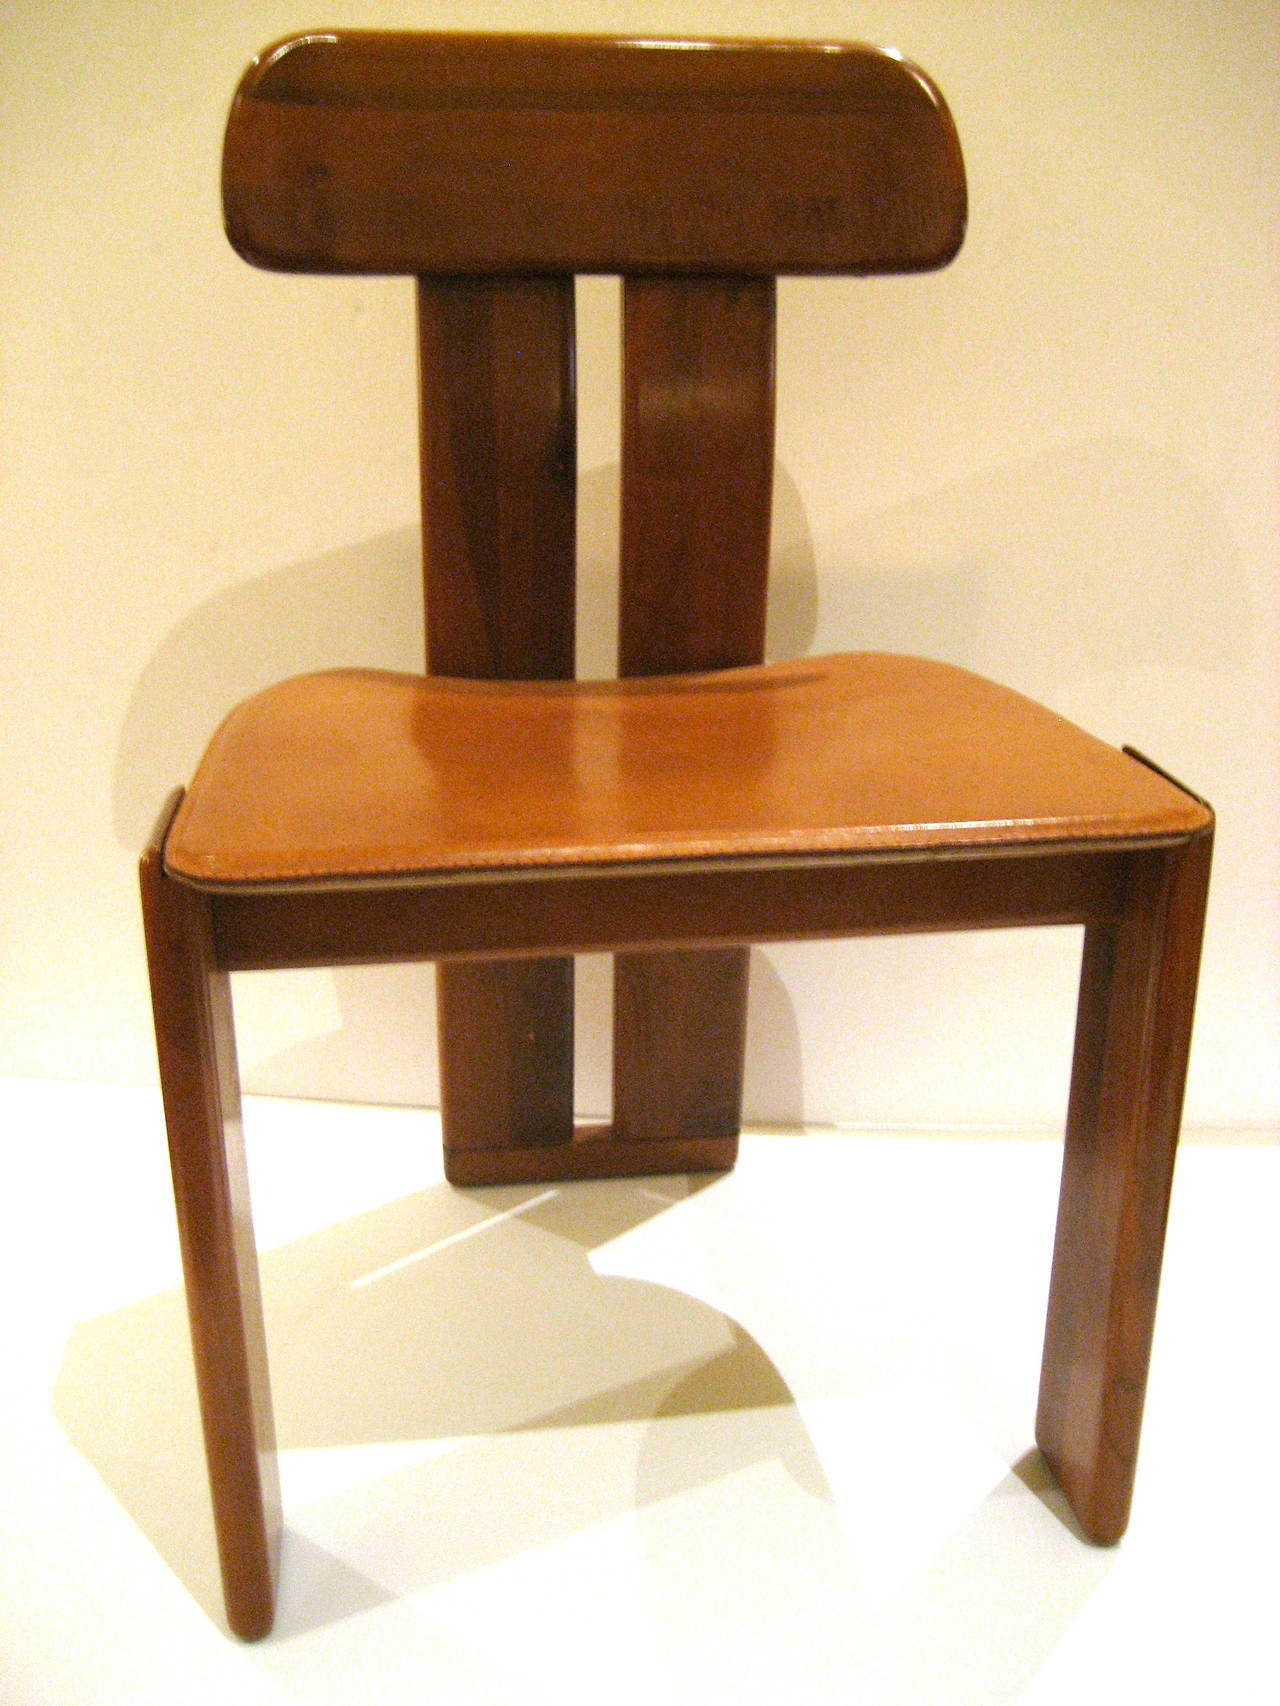 Italian Modern Chairs by Tobia Scarpa Walnut and Leather Seat 1